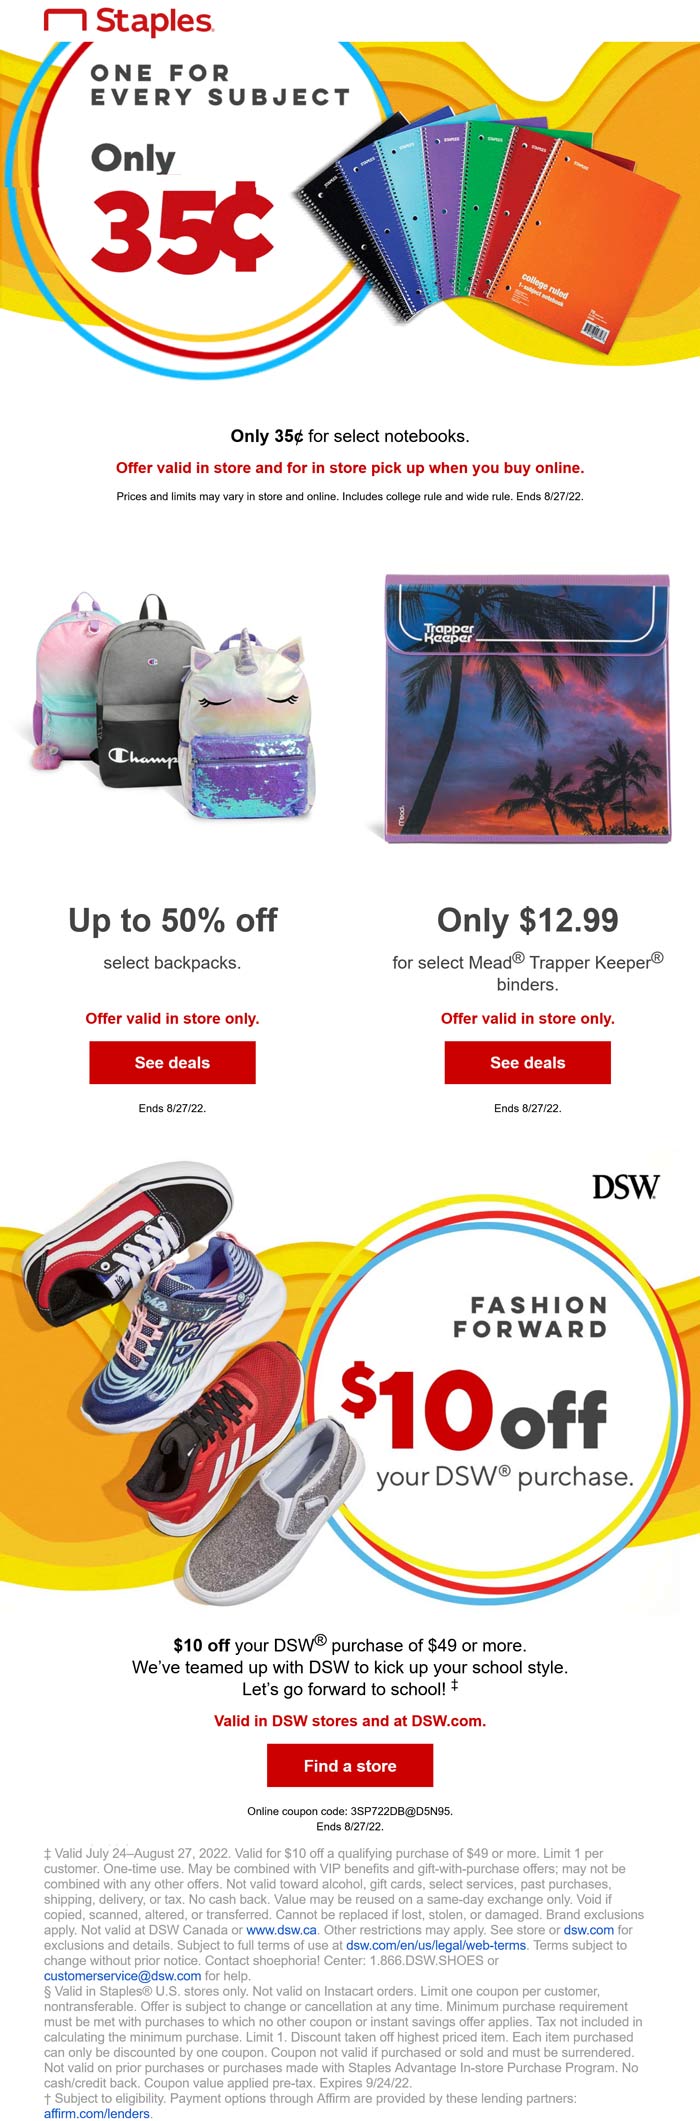 Staples stores Coupon  .35 cent notebooks & $10 off $49 on DSW shoes via Staples stores #staples 